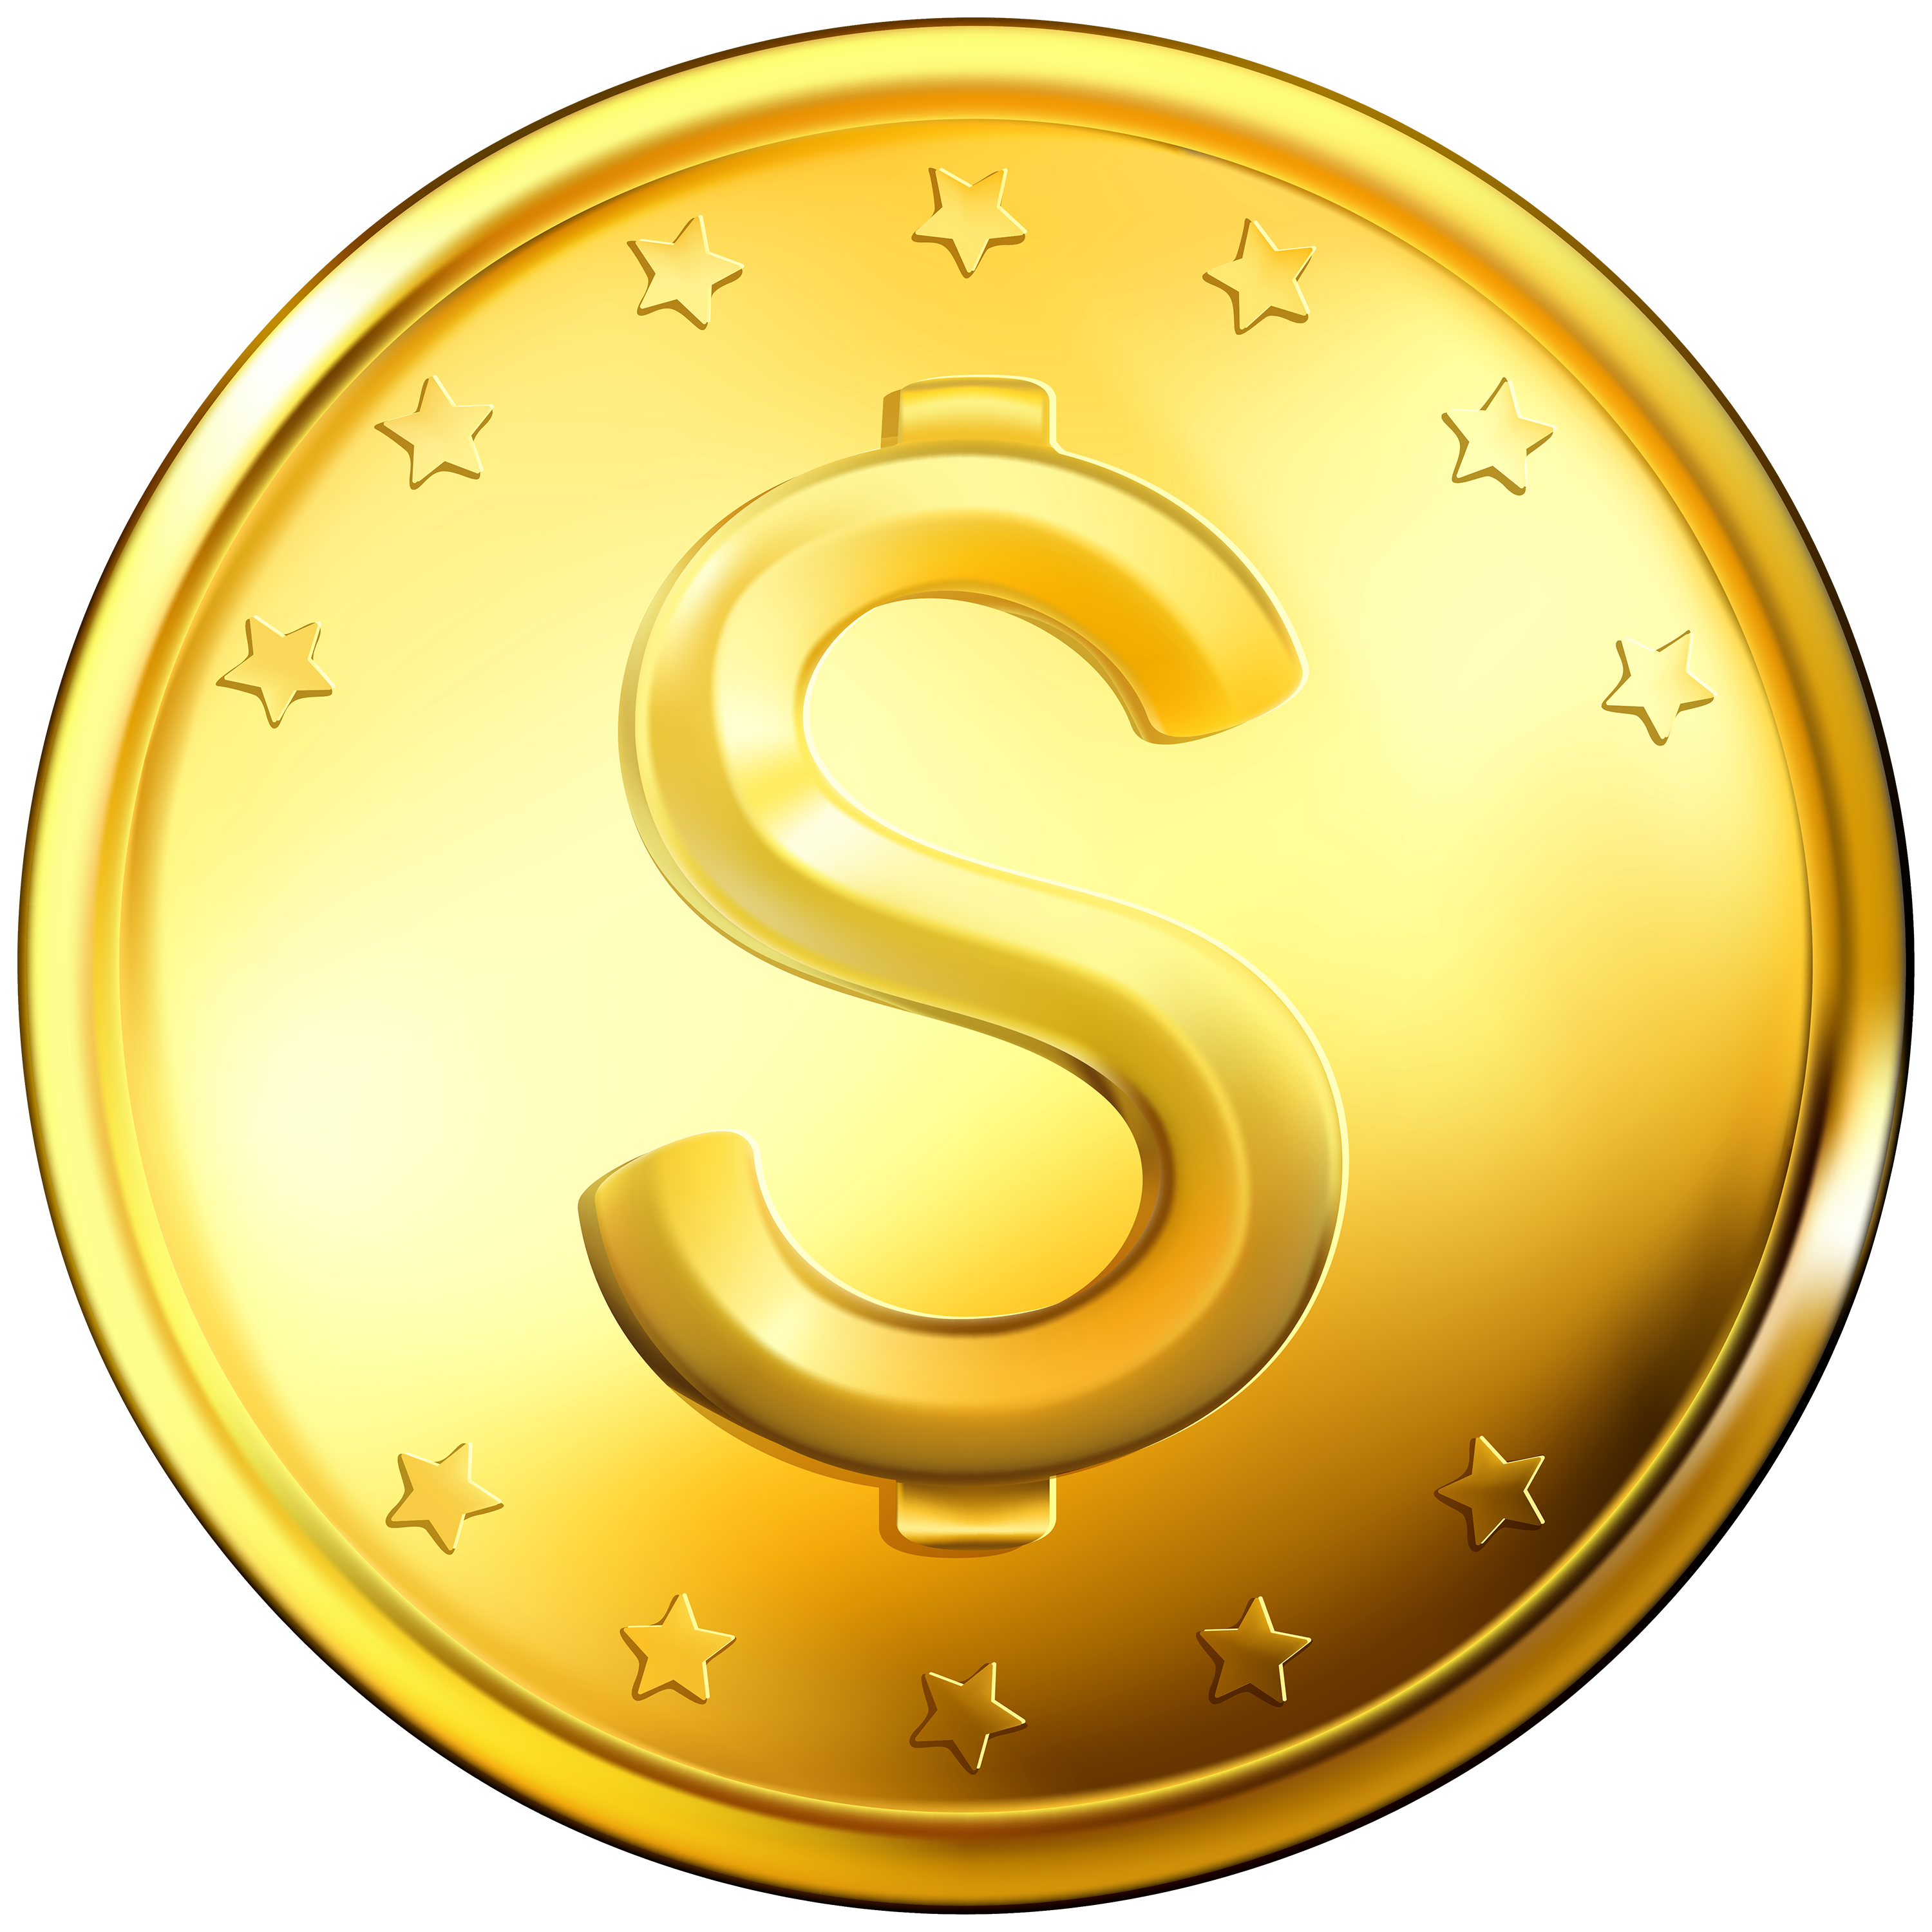 Coin Png Hd Hdpng Pluspng.com 3000   Coin Png Hd - Coins, Transparent background PNG HD thumbnail